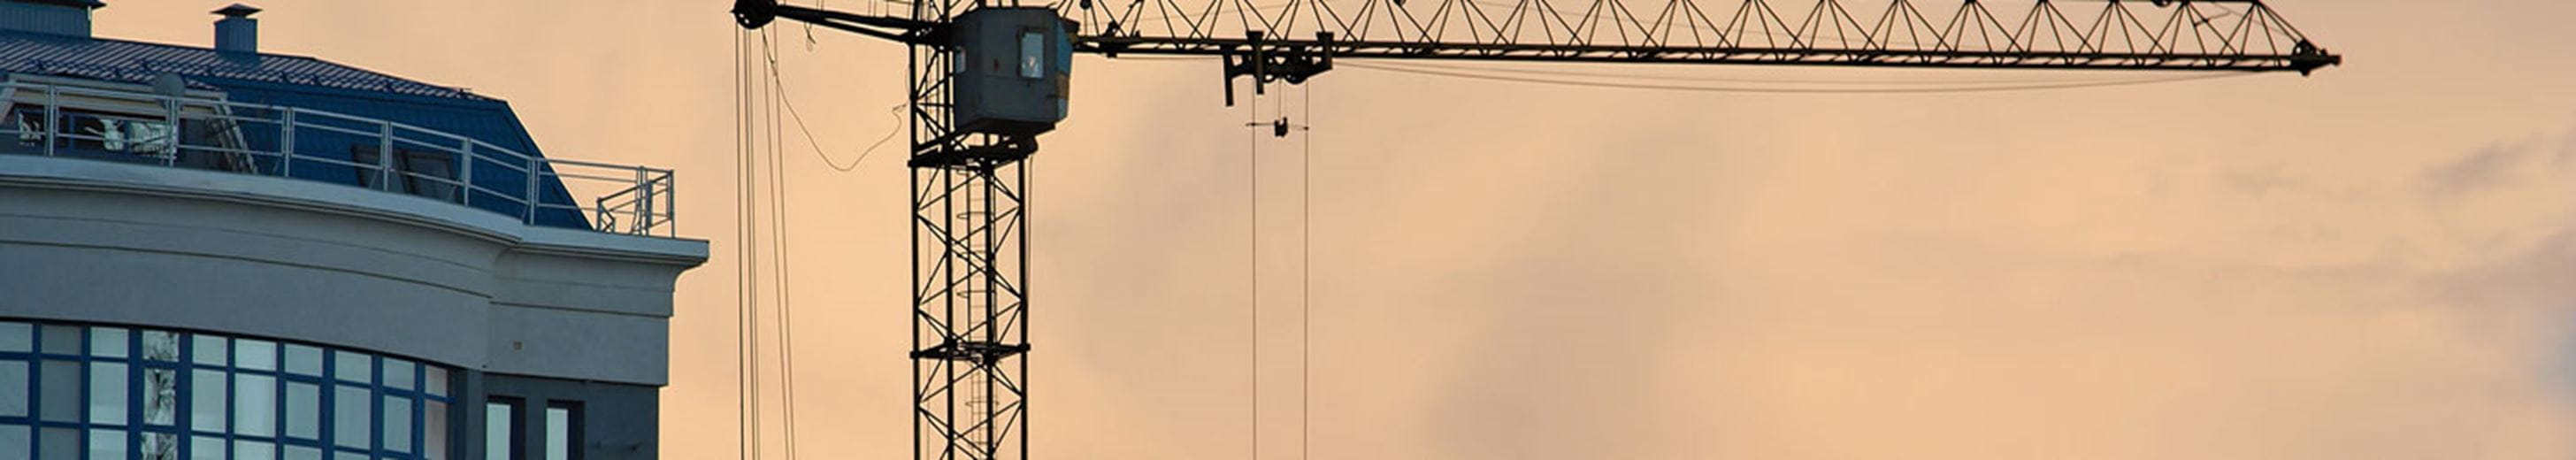 Commercial crane at sunset